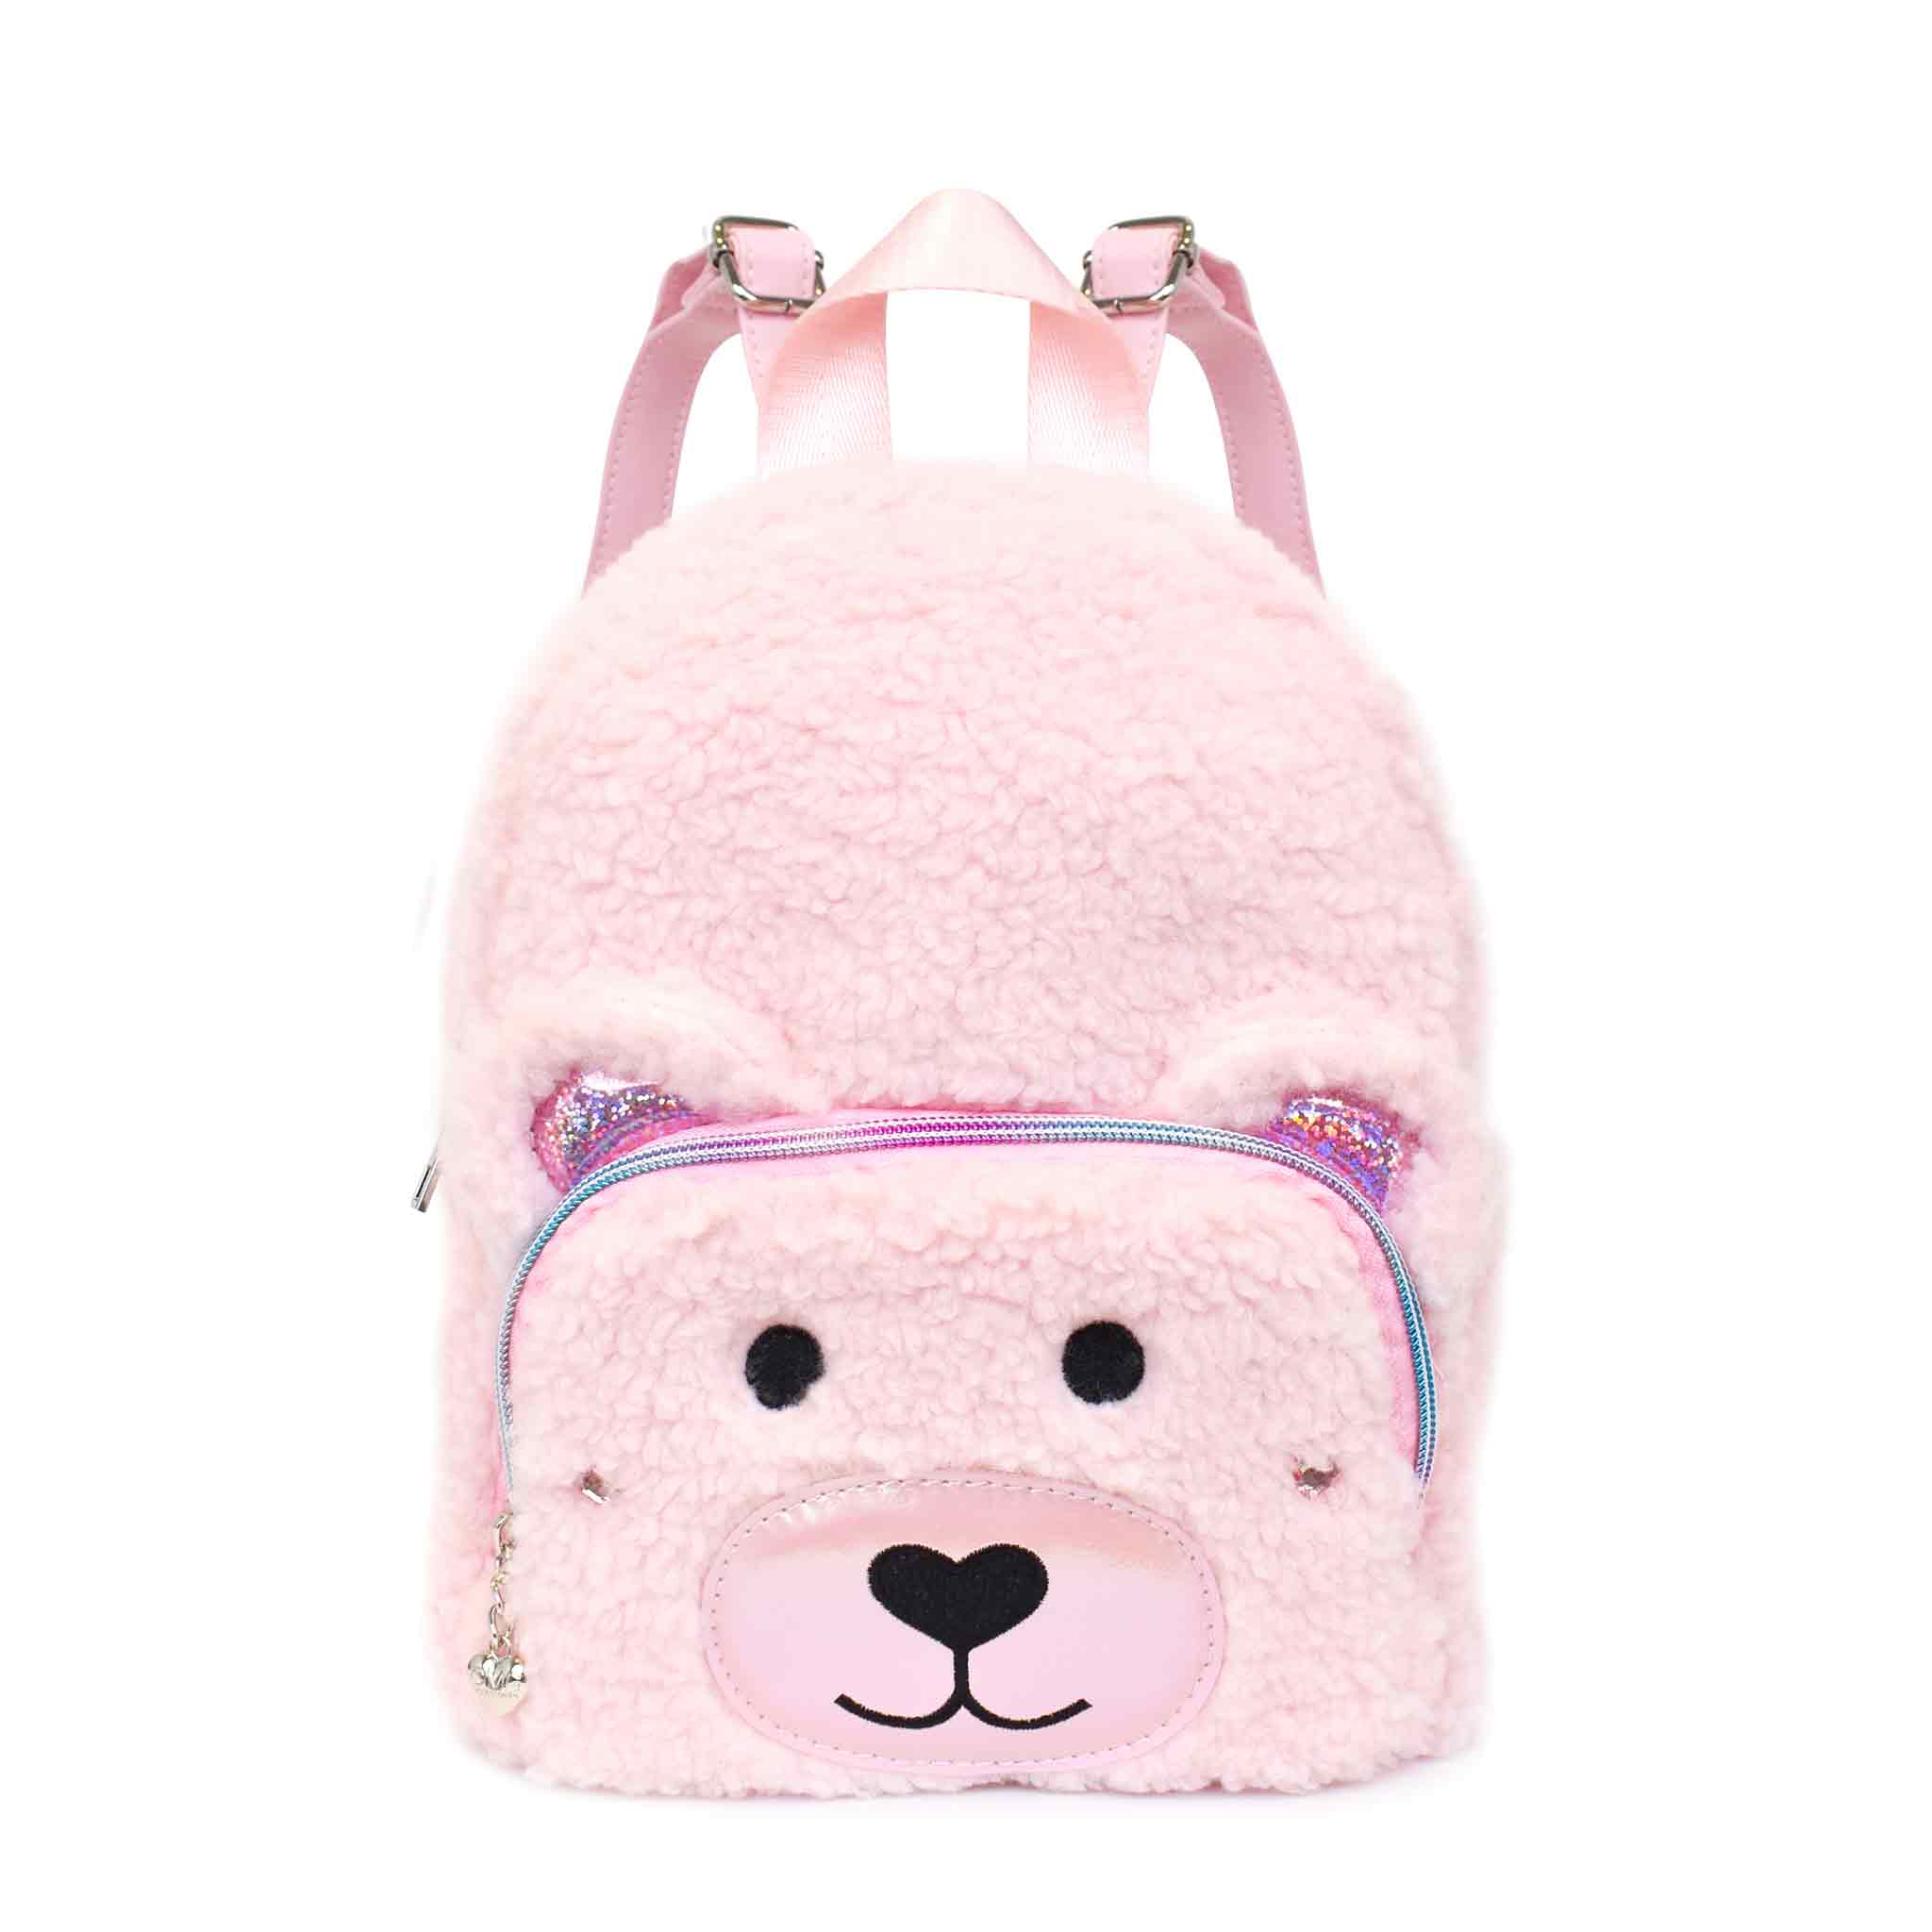 Front View of Pink Sherpa Teddy Mini Backpack